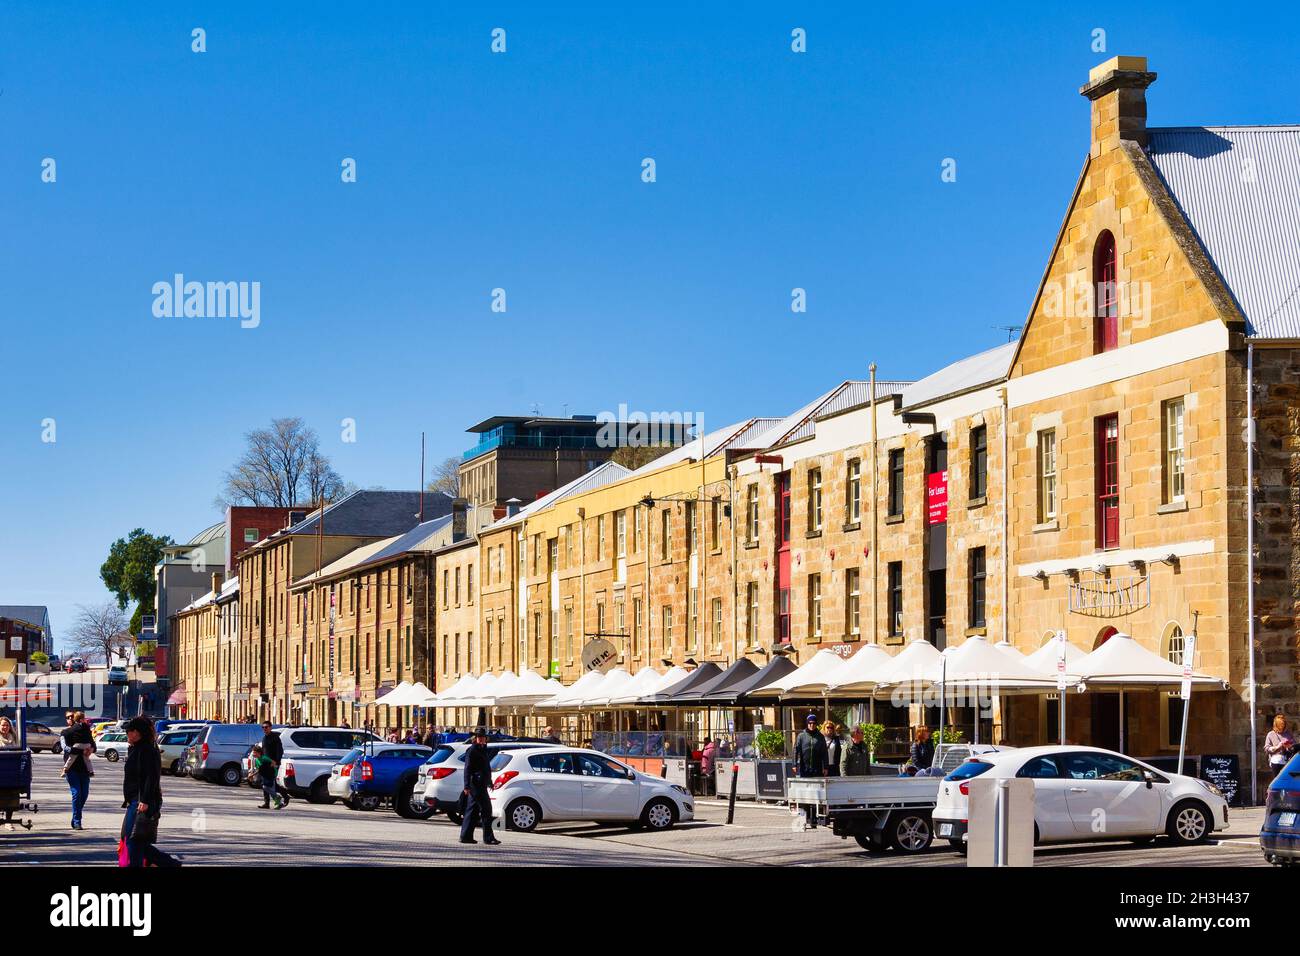 These sandstone buildings in Salamanca Place to be warehouses for the port of Hobart - Hobart, Tasmania, Australia Stock Photo